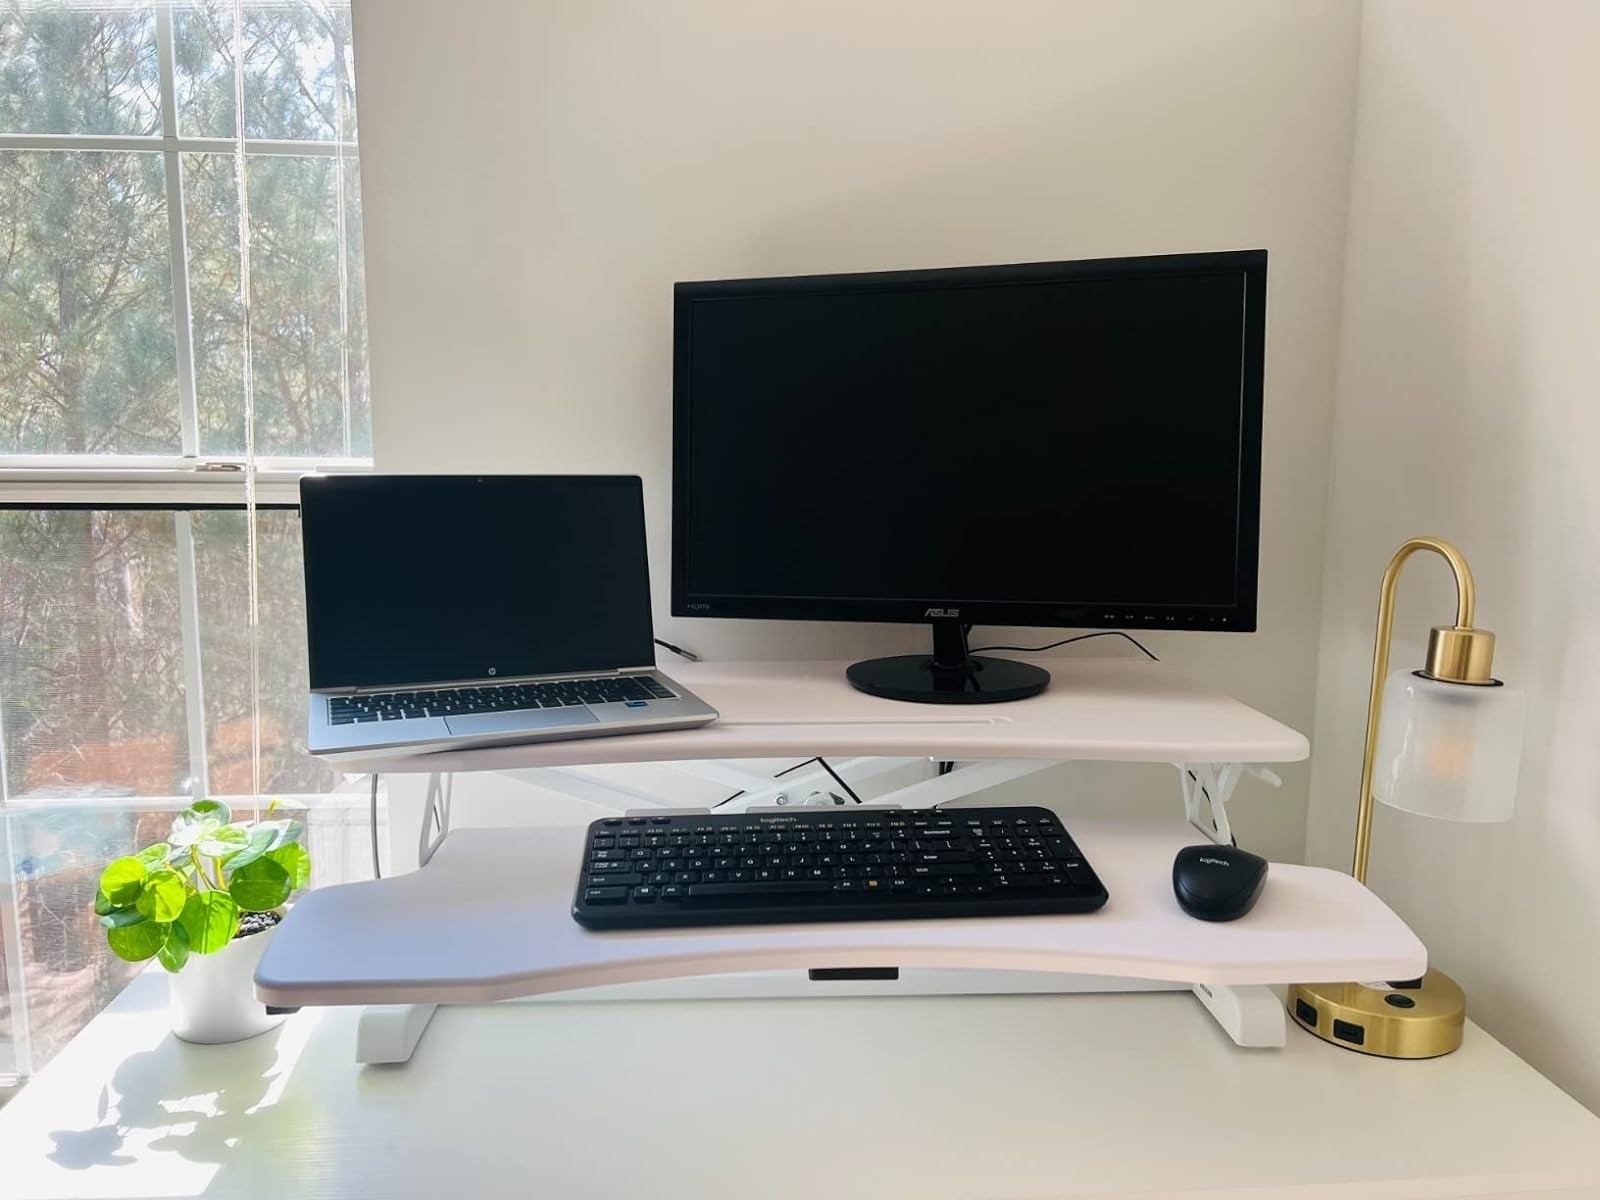 white standing desk converter with level for computer monitor and laptop and another level for keyboard